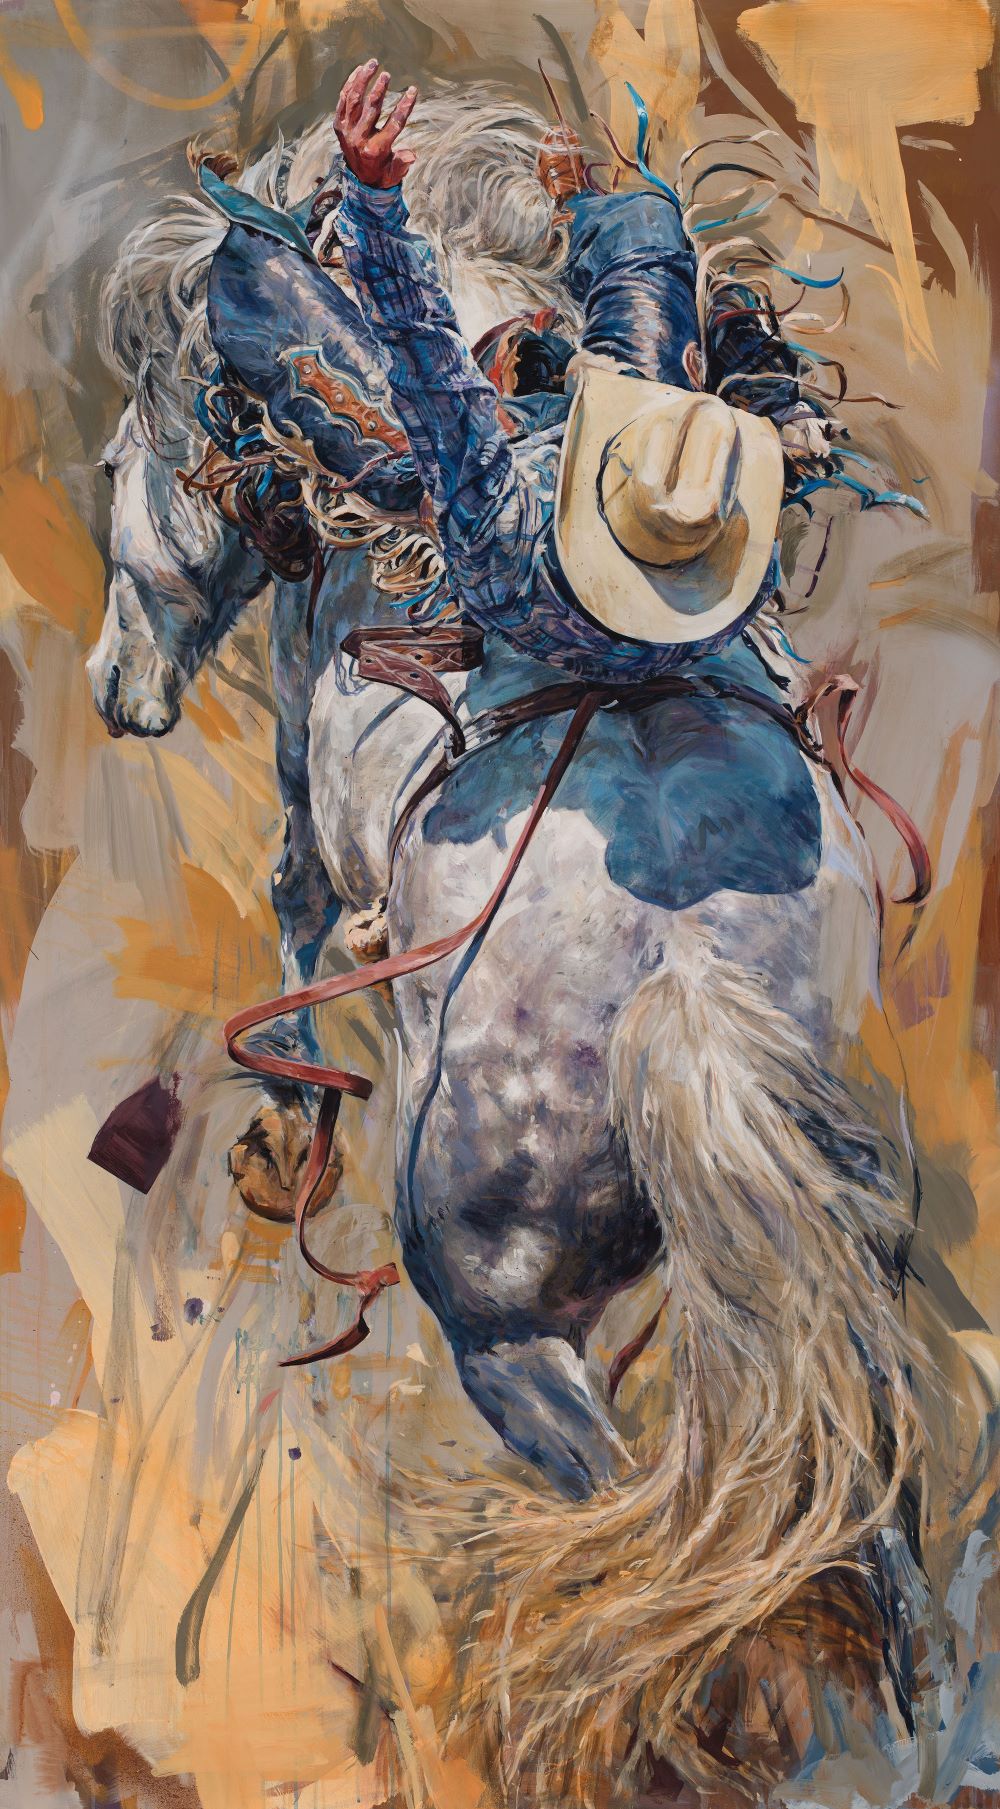 Western art - Sophy Brown, "Lit Fuse and Count to Ten"